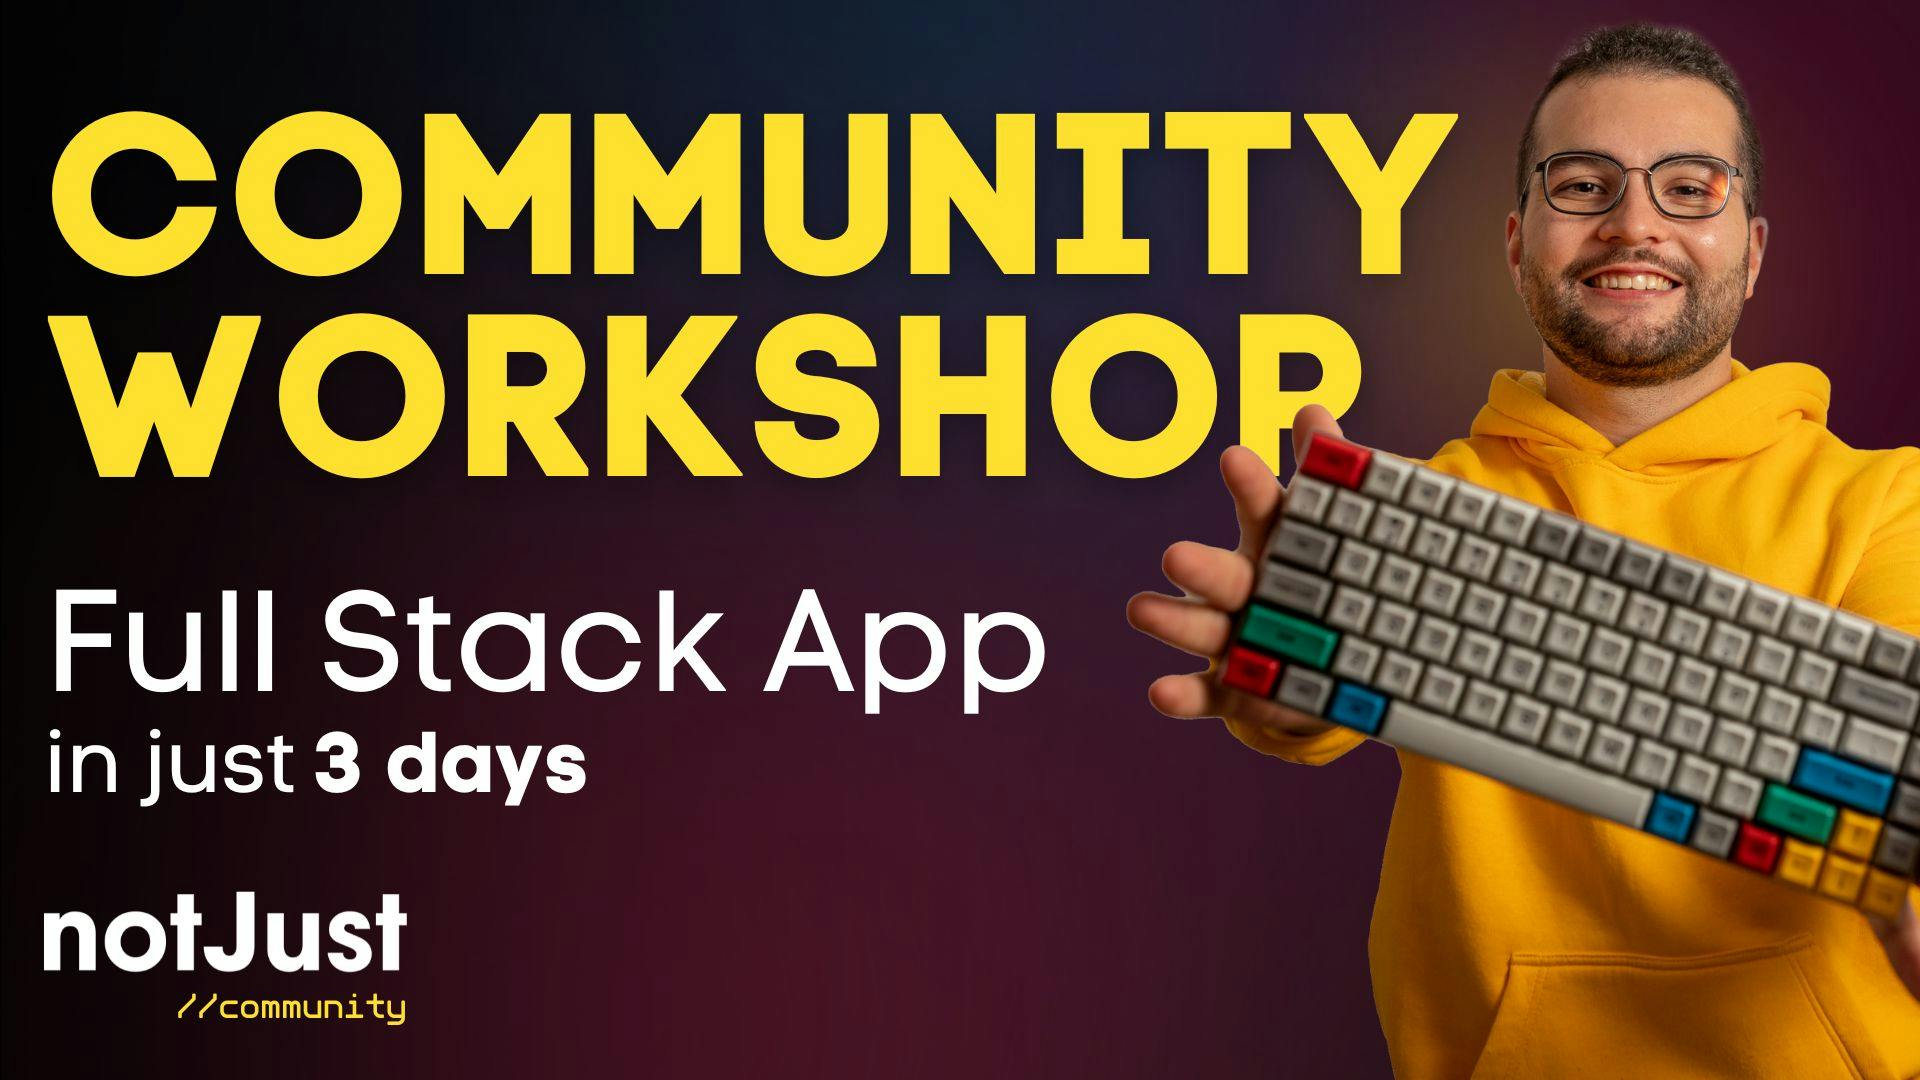 Community Workshop - Build a full-stack app in just 3 days